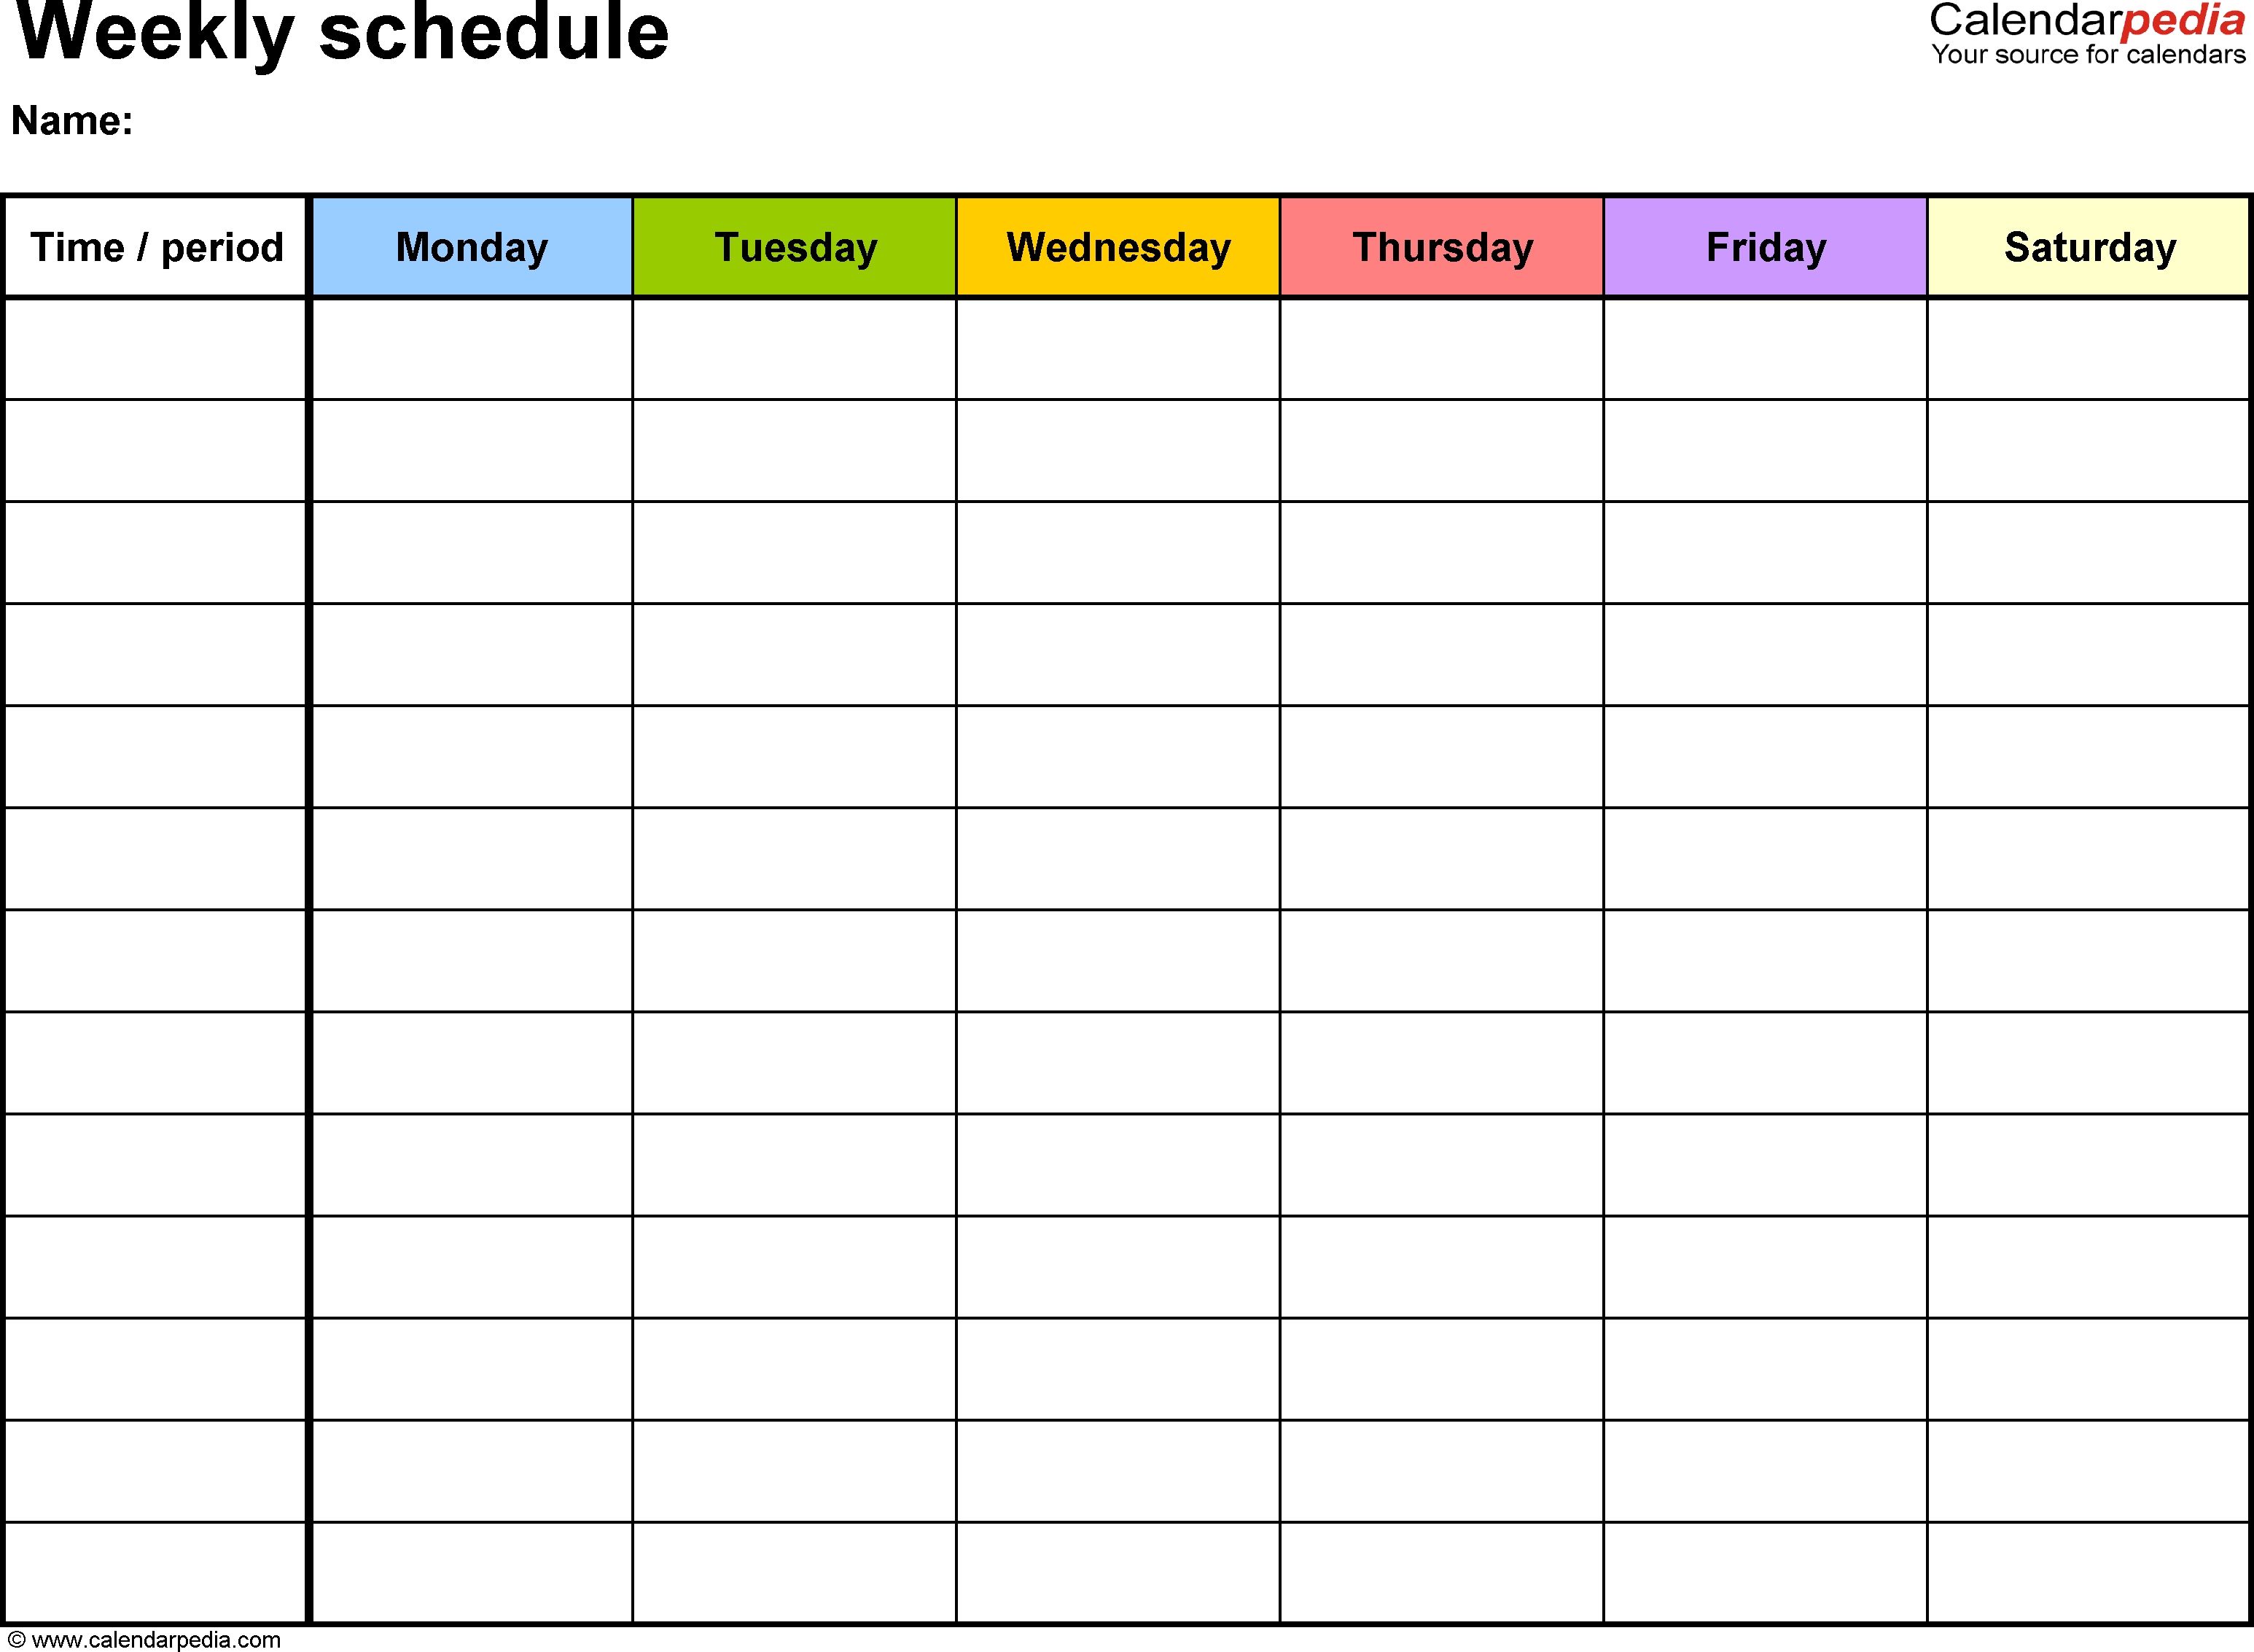 Free Weekly Schedule Templates For Word - 18 Templates-Five Day Monthly Calendar For Word